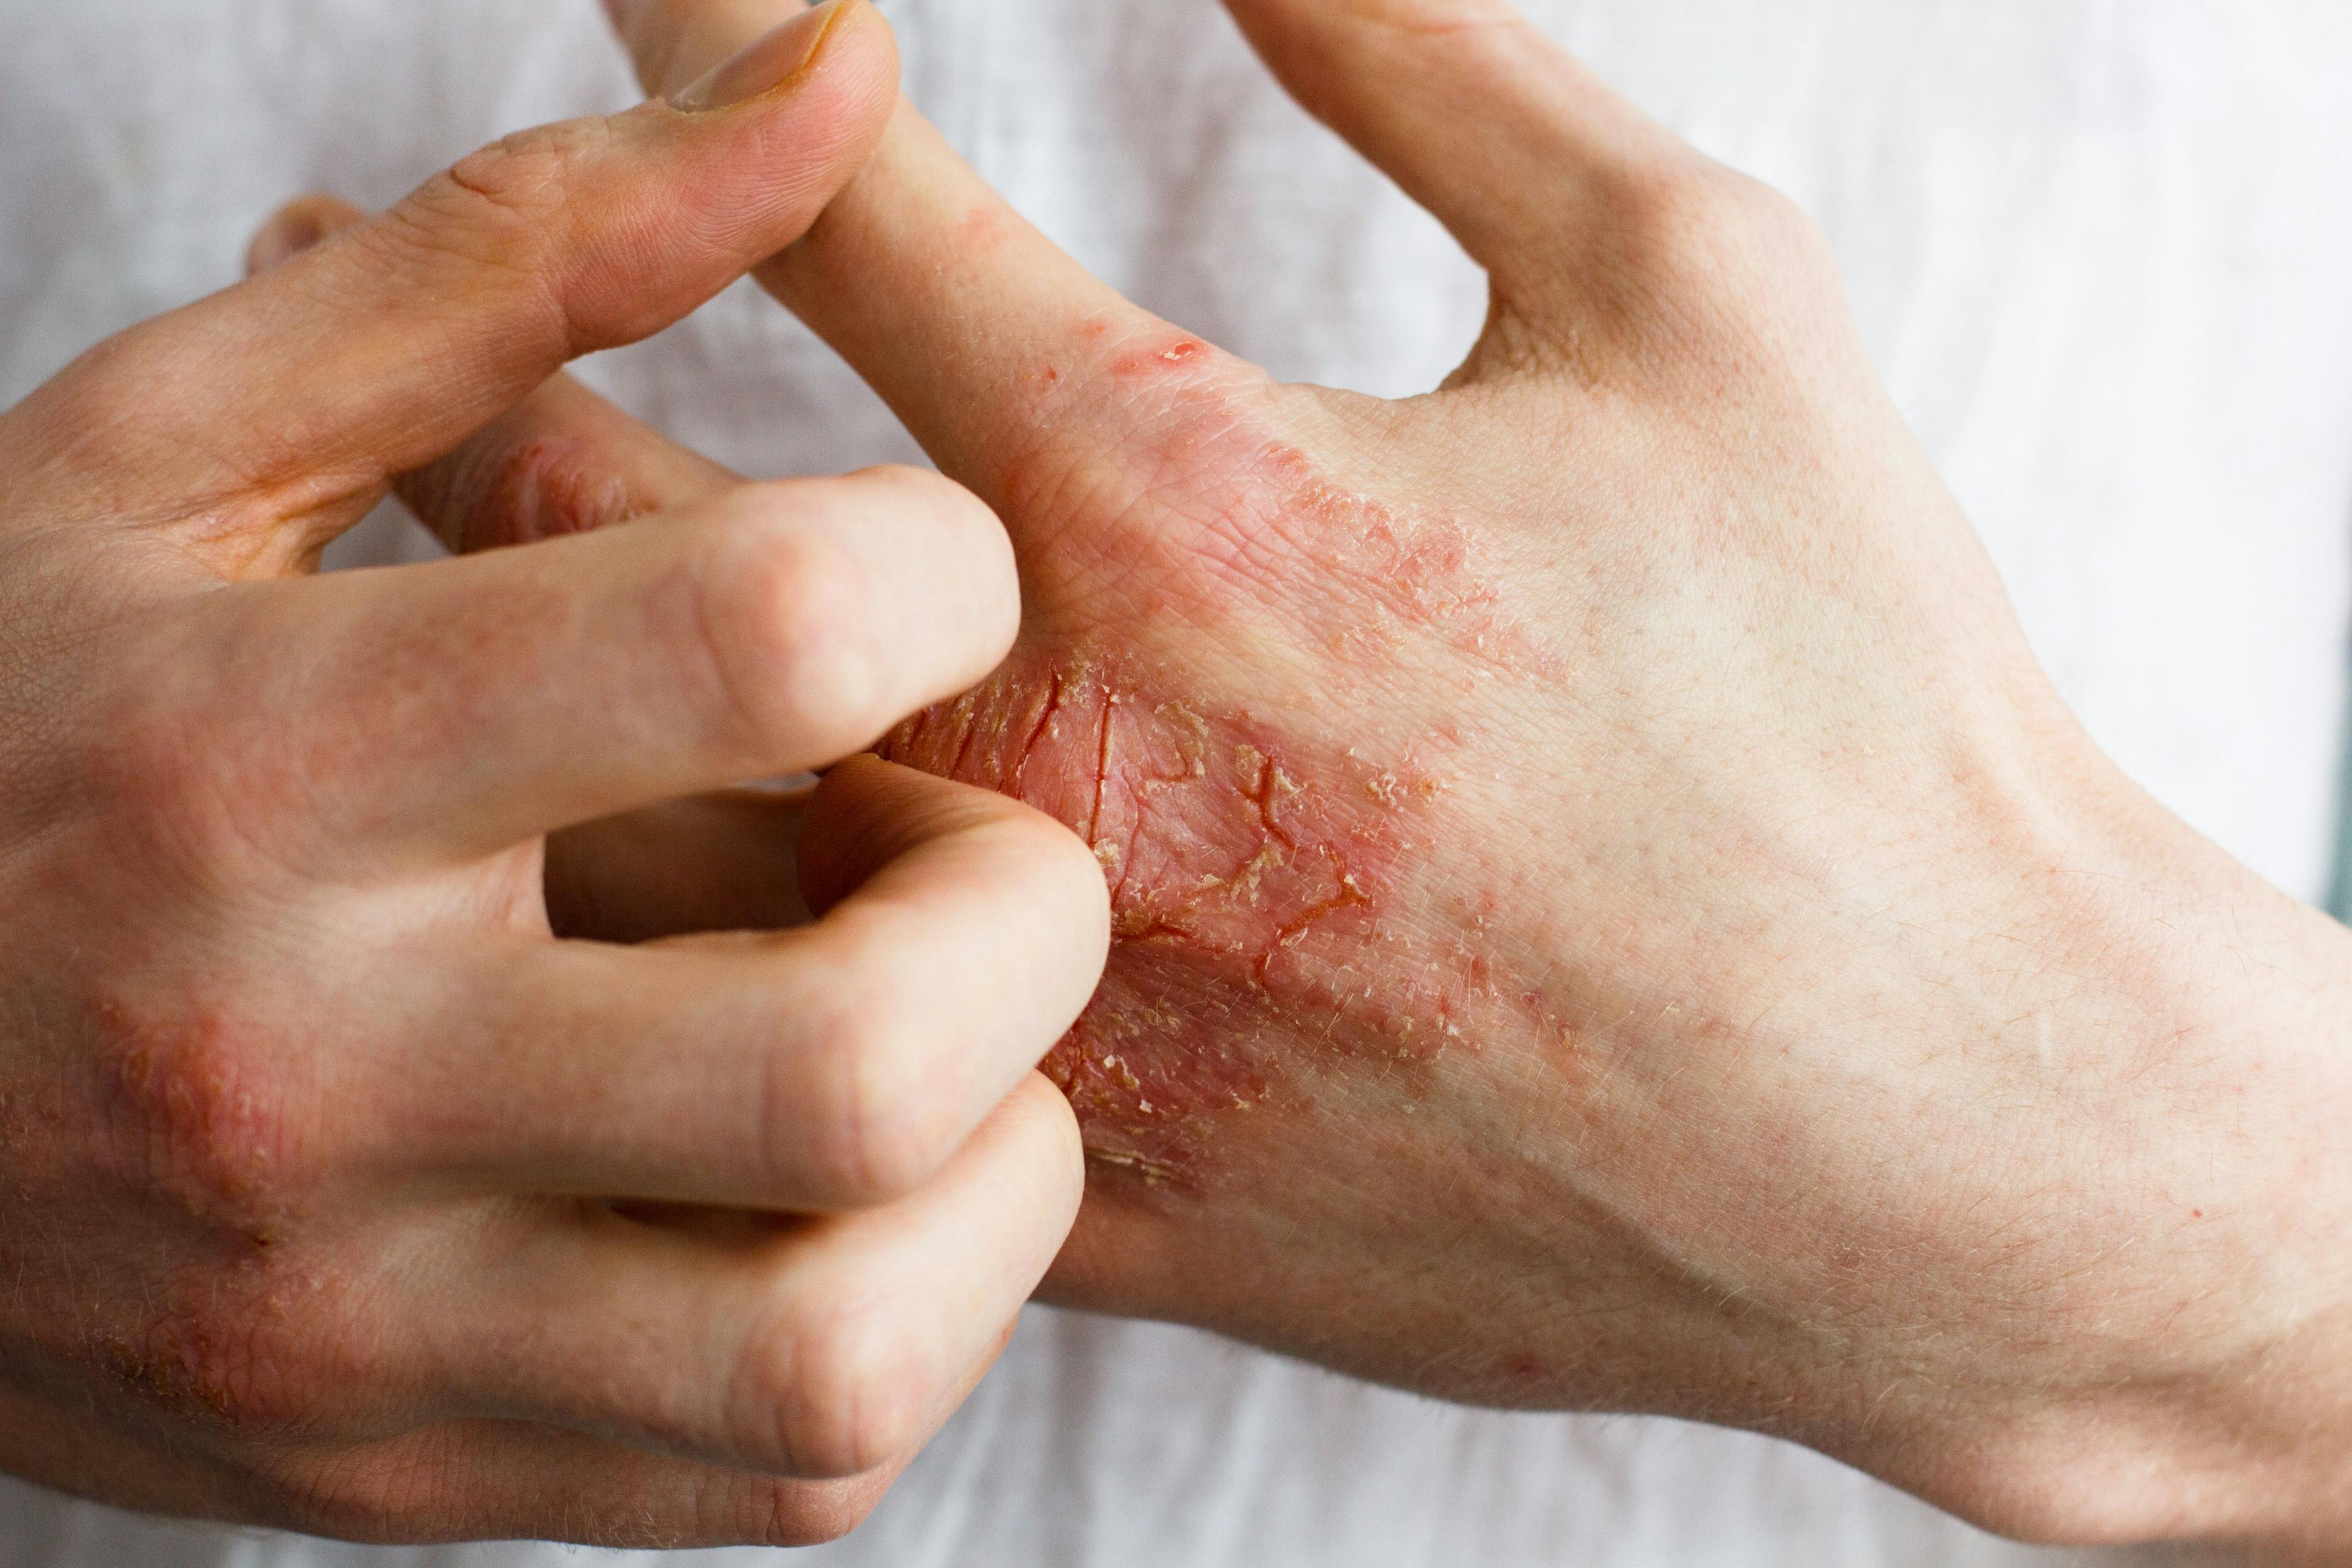 Delgocitinib Cream Study Reports Positive Results in Phase 3 Trial for Chronic Hand Eczema 